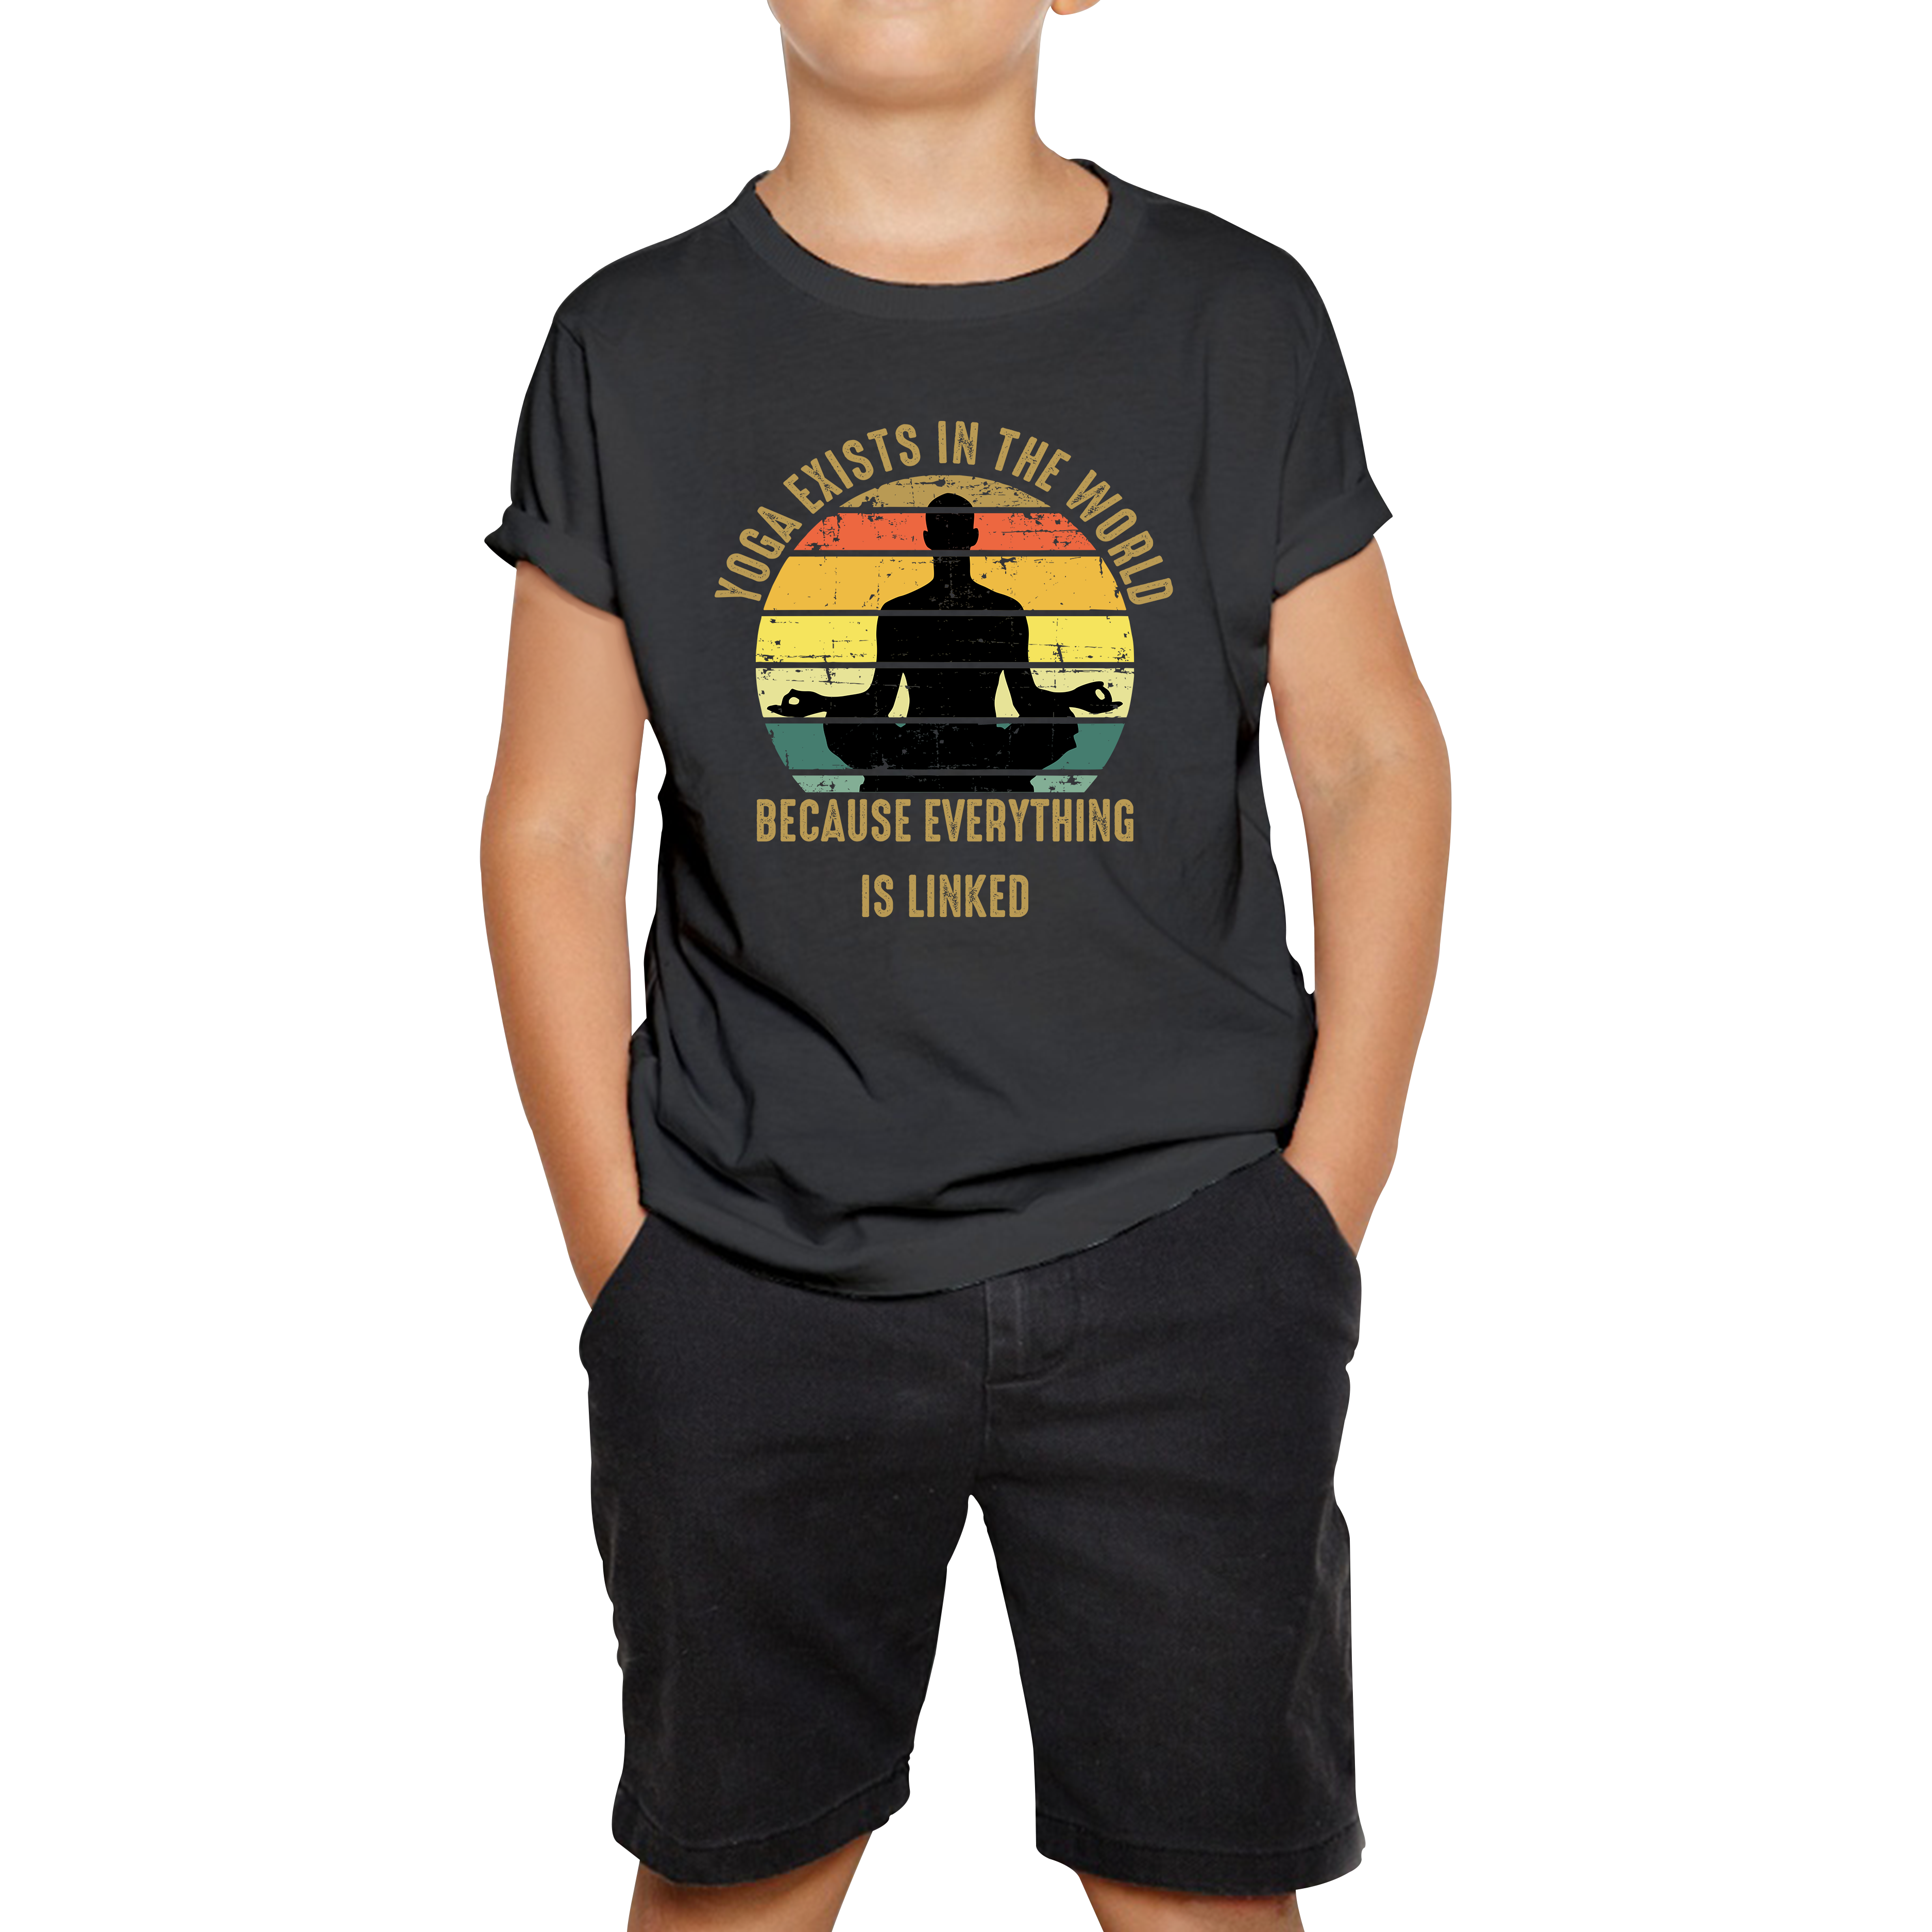 Yoga Exist In The World Because Everything Is Linked Vintage Exercise Lovers Kids Tee